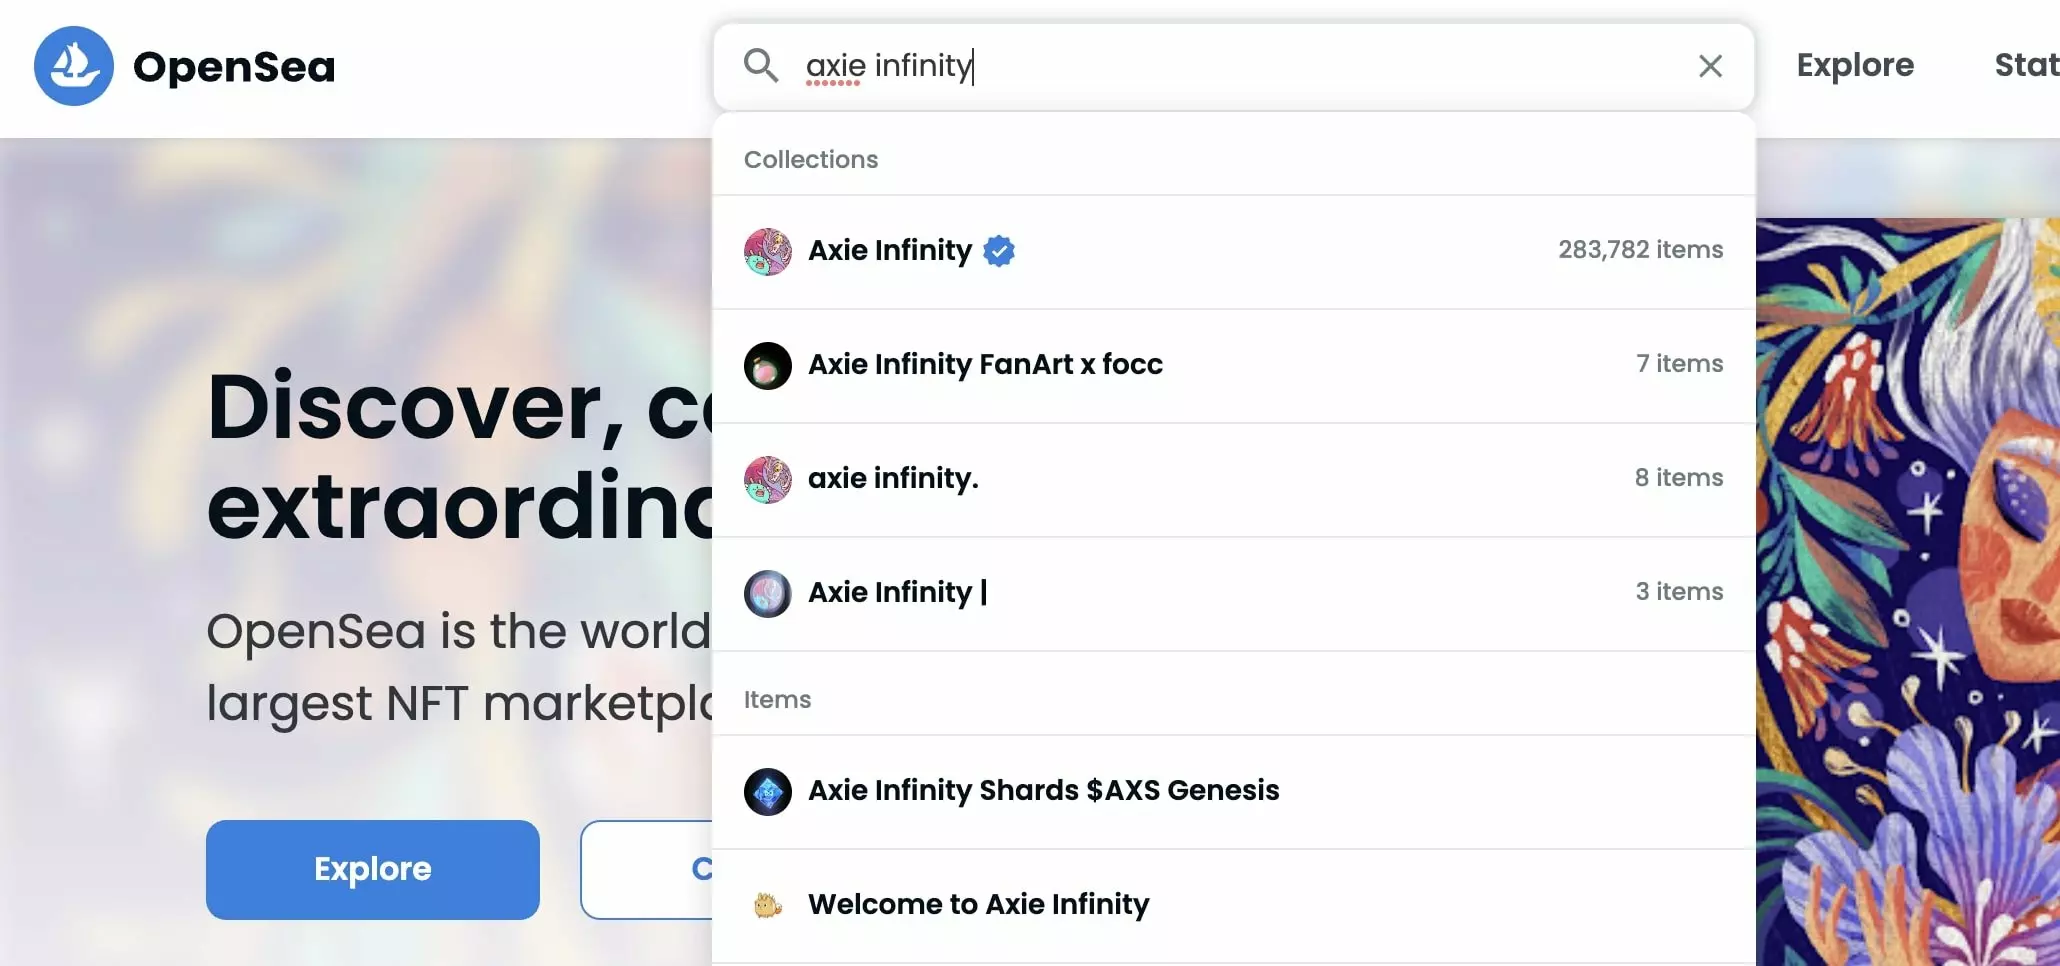 OpenSea marketplace showing Axie Infinity